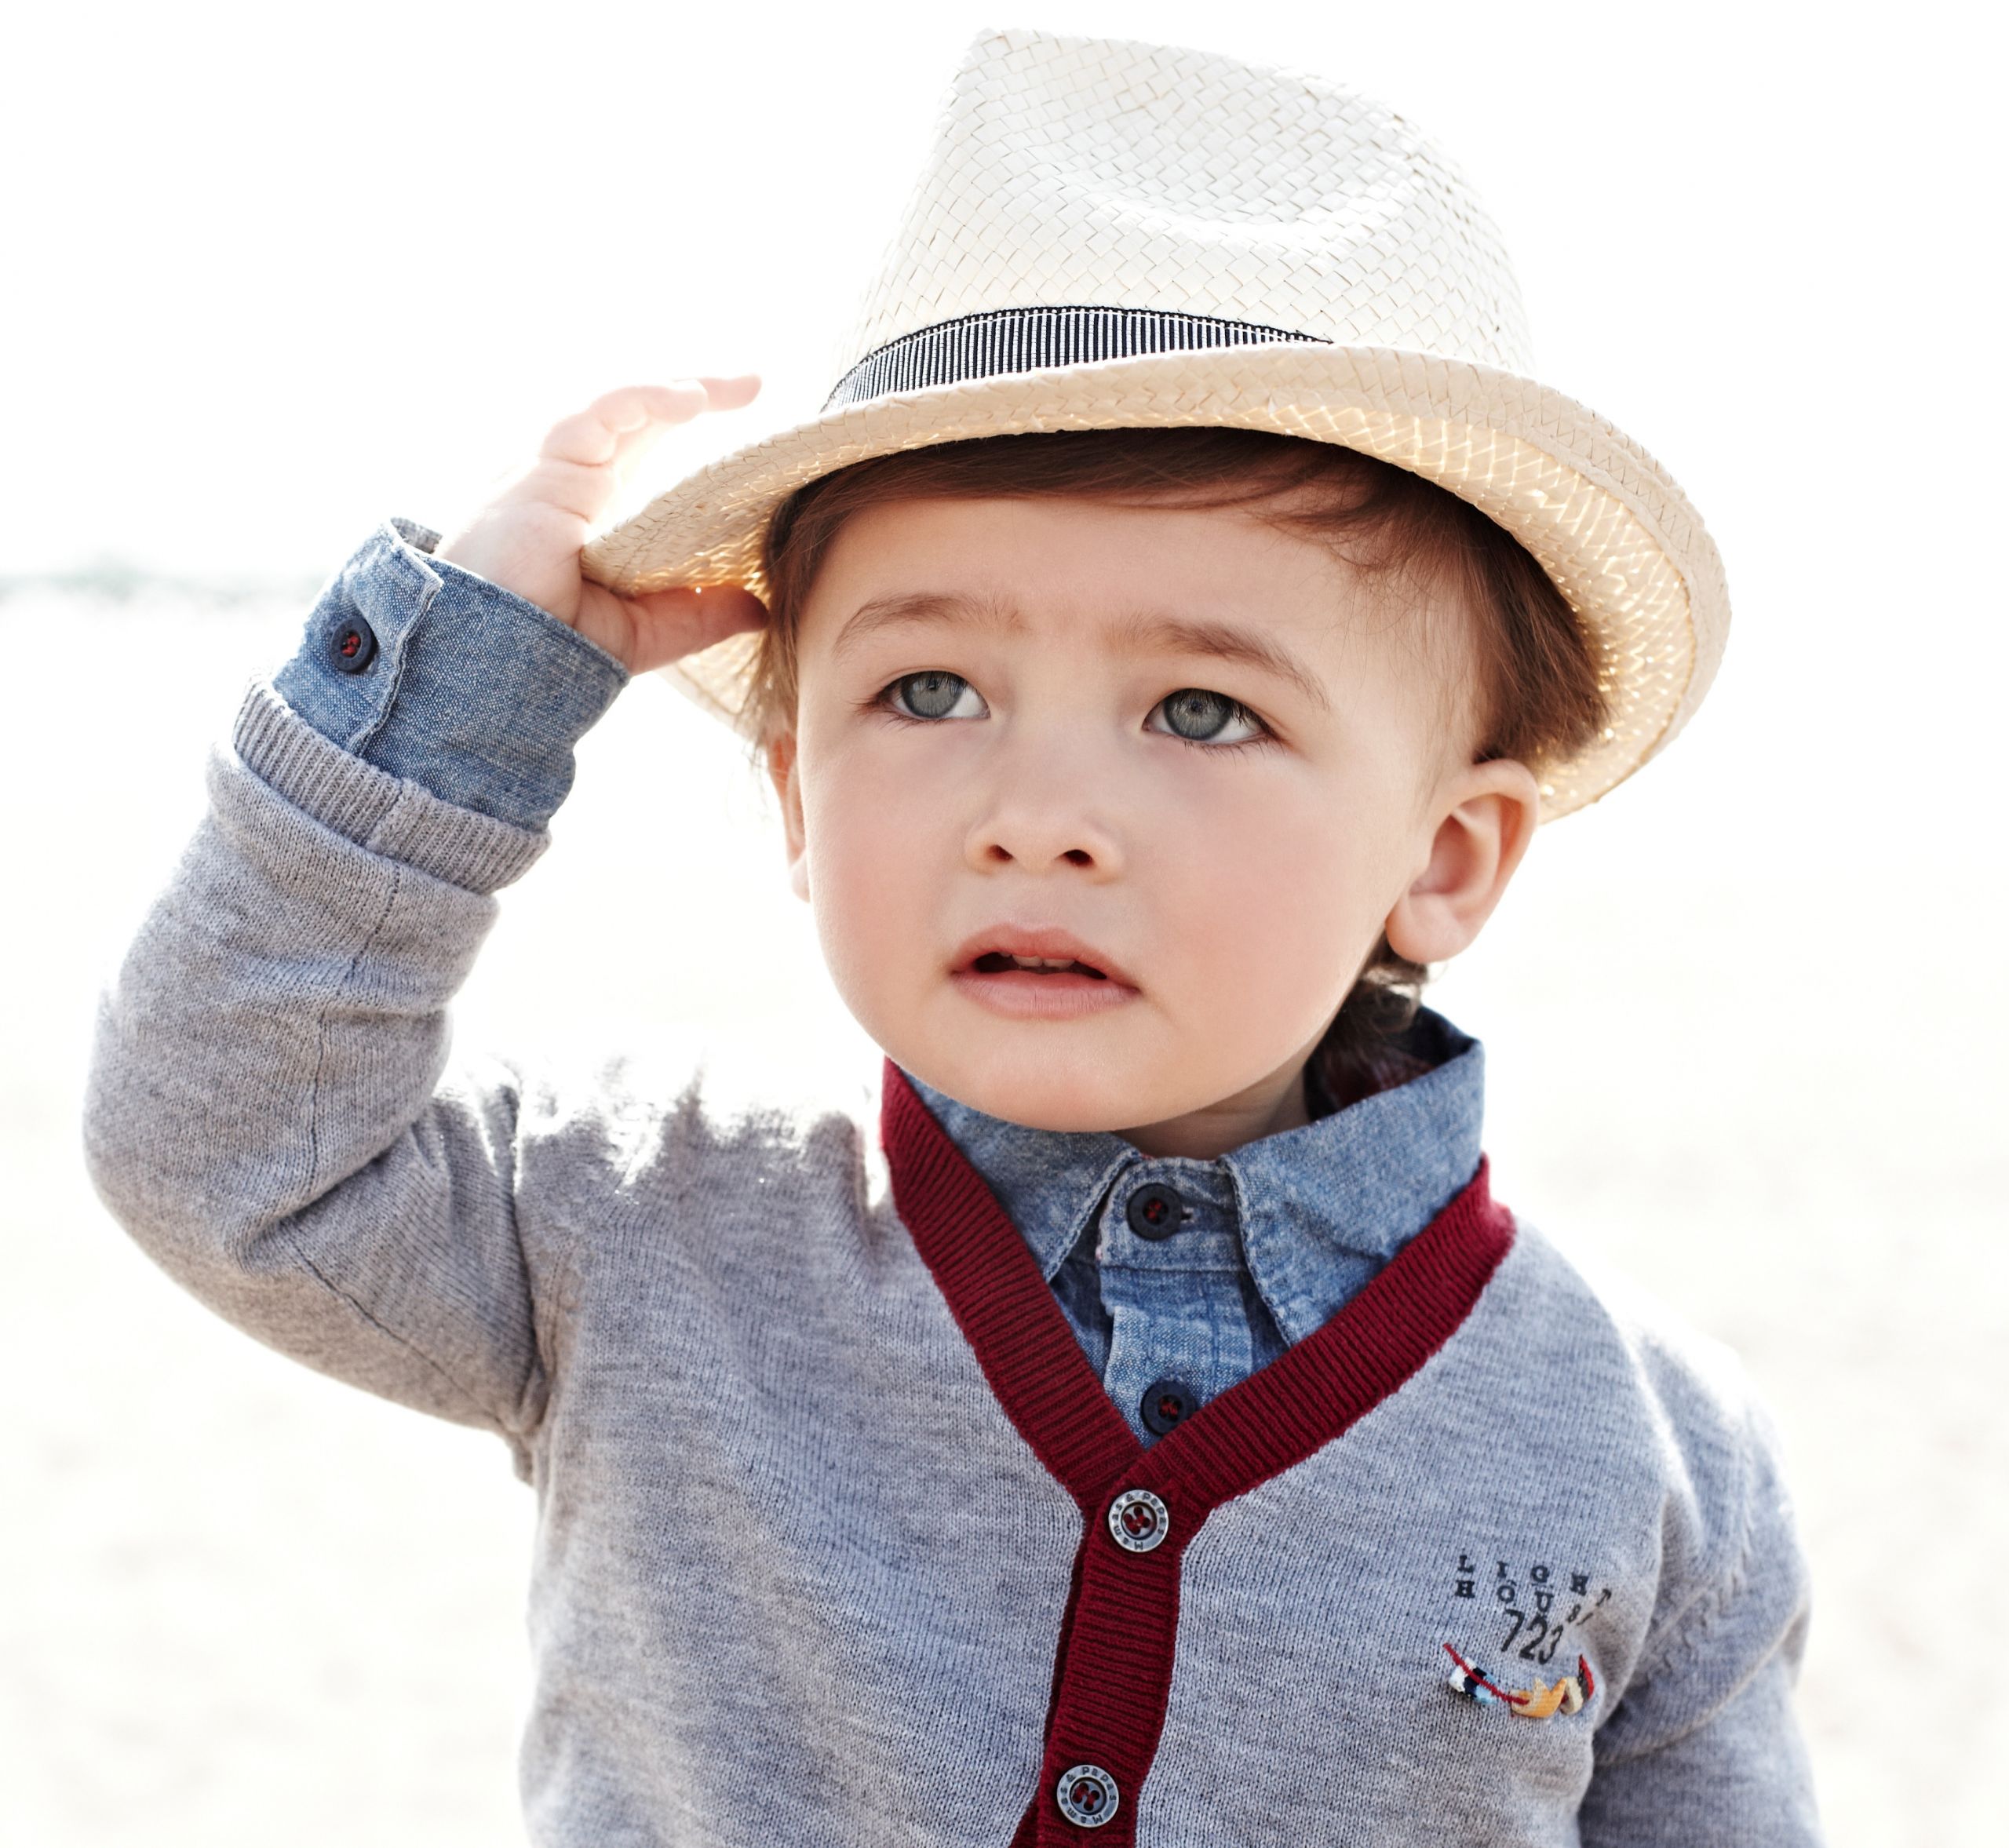 Baby Fashion Clothing
 Importance of Baby Clothing for their Beauty and Care